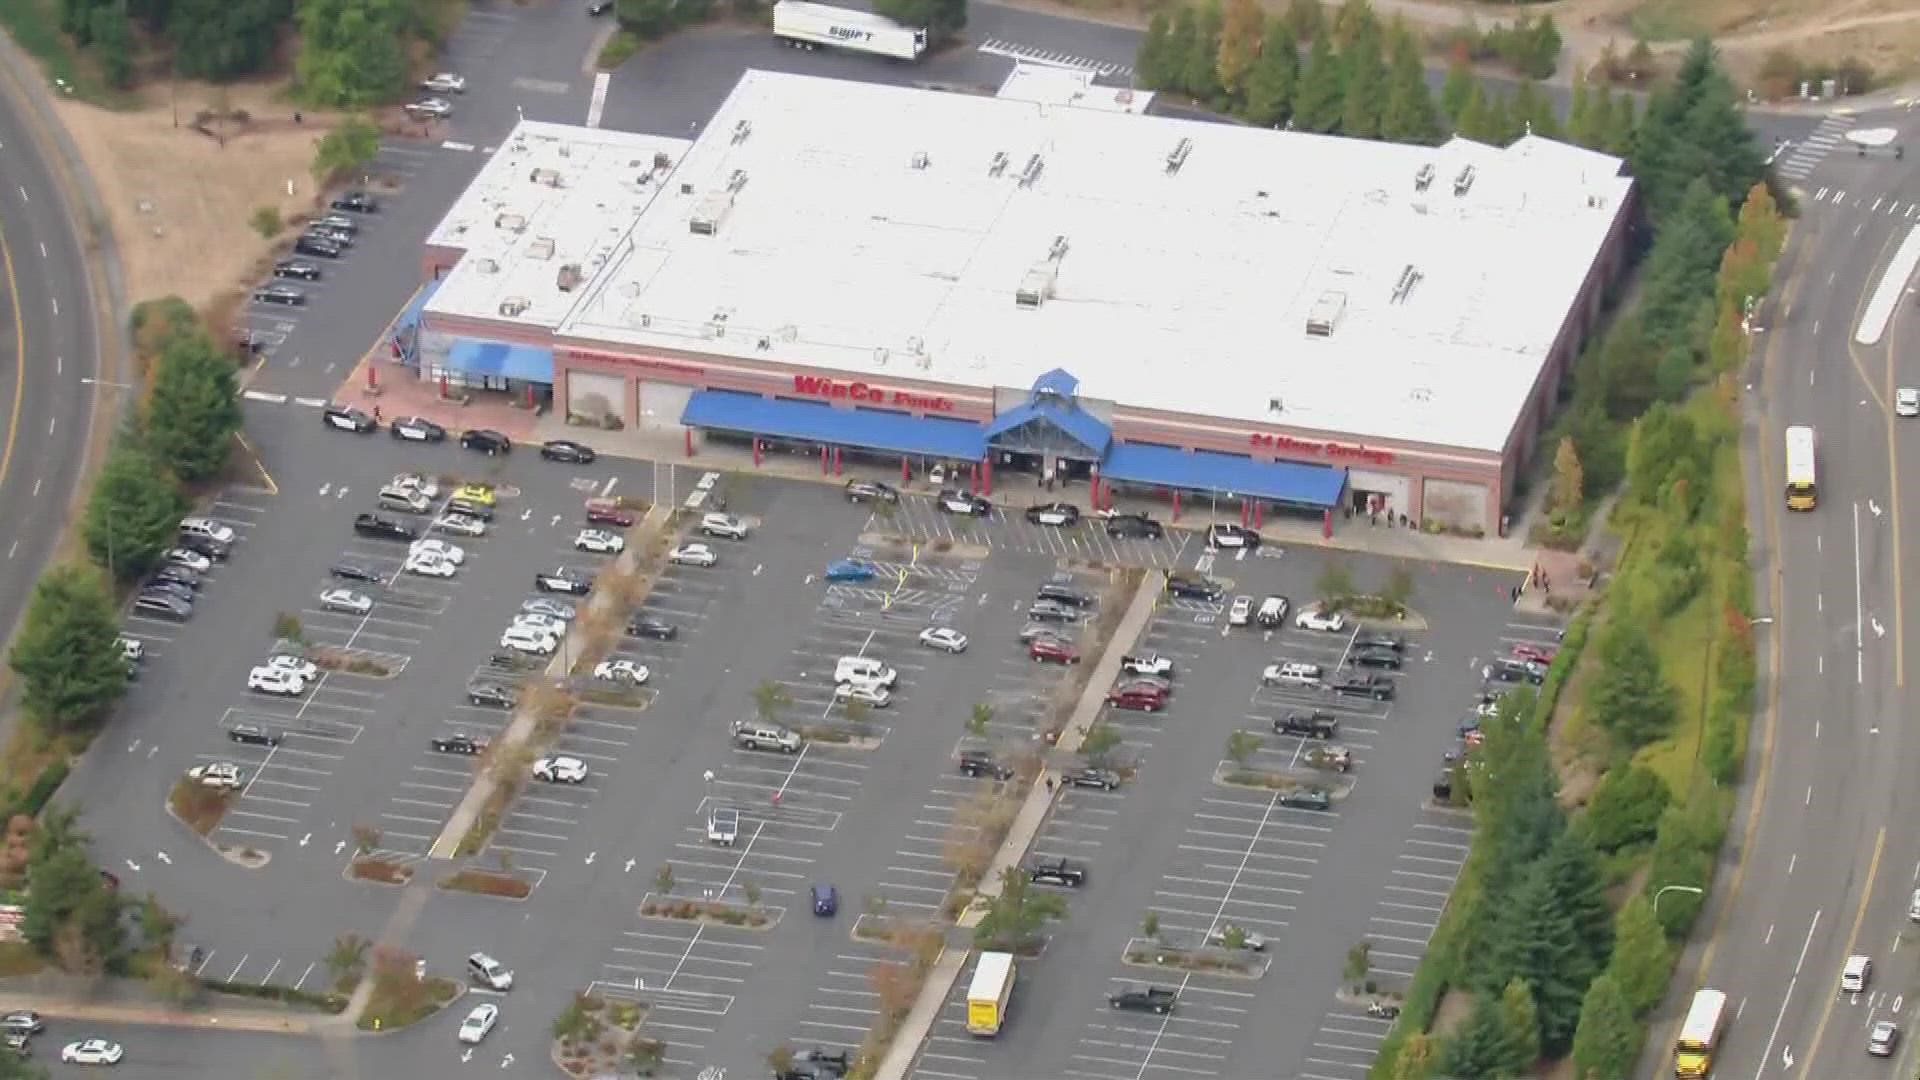 A WinCo Foods employee was allegedly shot while escorting the suspect out of the Federal Way store after denying the purchase of alcohol on Sept. 9.